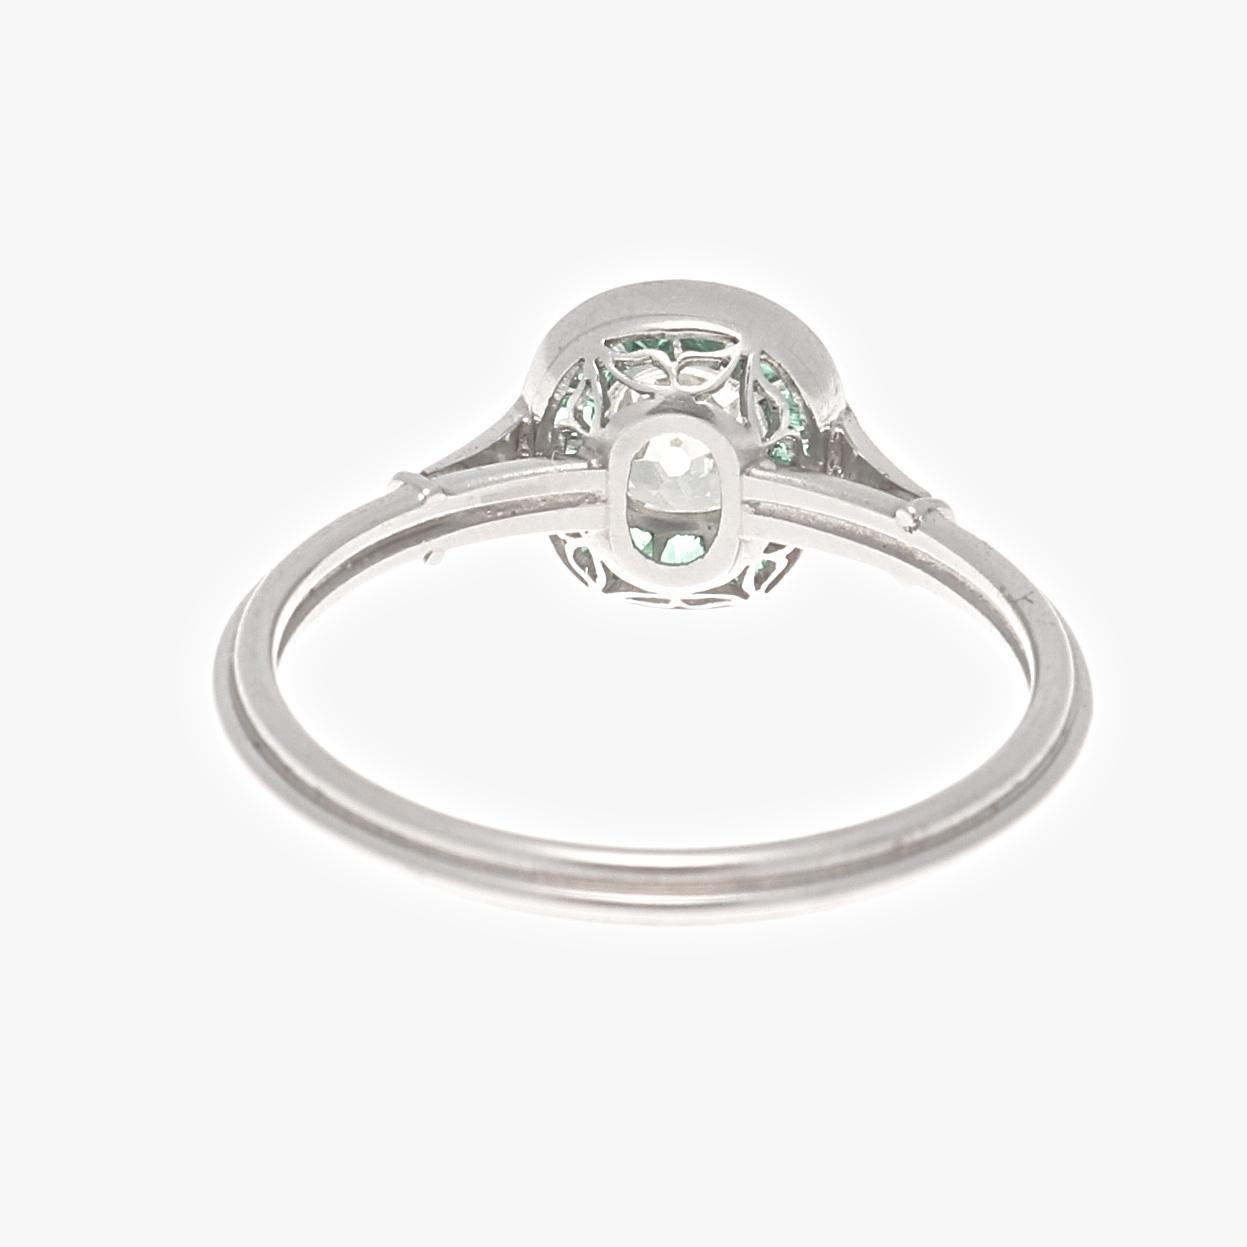 A design driven by colorful passion giving devotion to the art deco time period. Featuring a 0.66 carat old mine cut diamond that is L color, VS1 clarity. Brilliantly surrounded by a vibrant green halo of calibrated emeralds specially cut to mirror